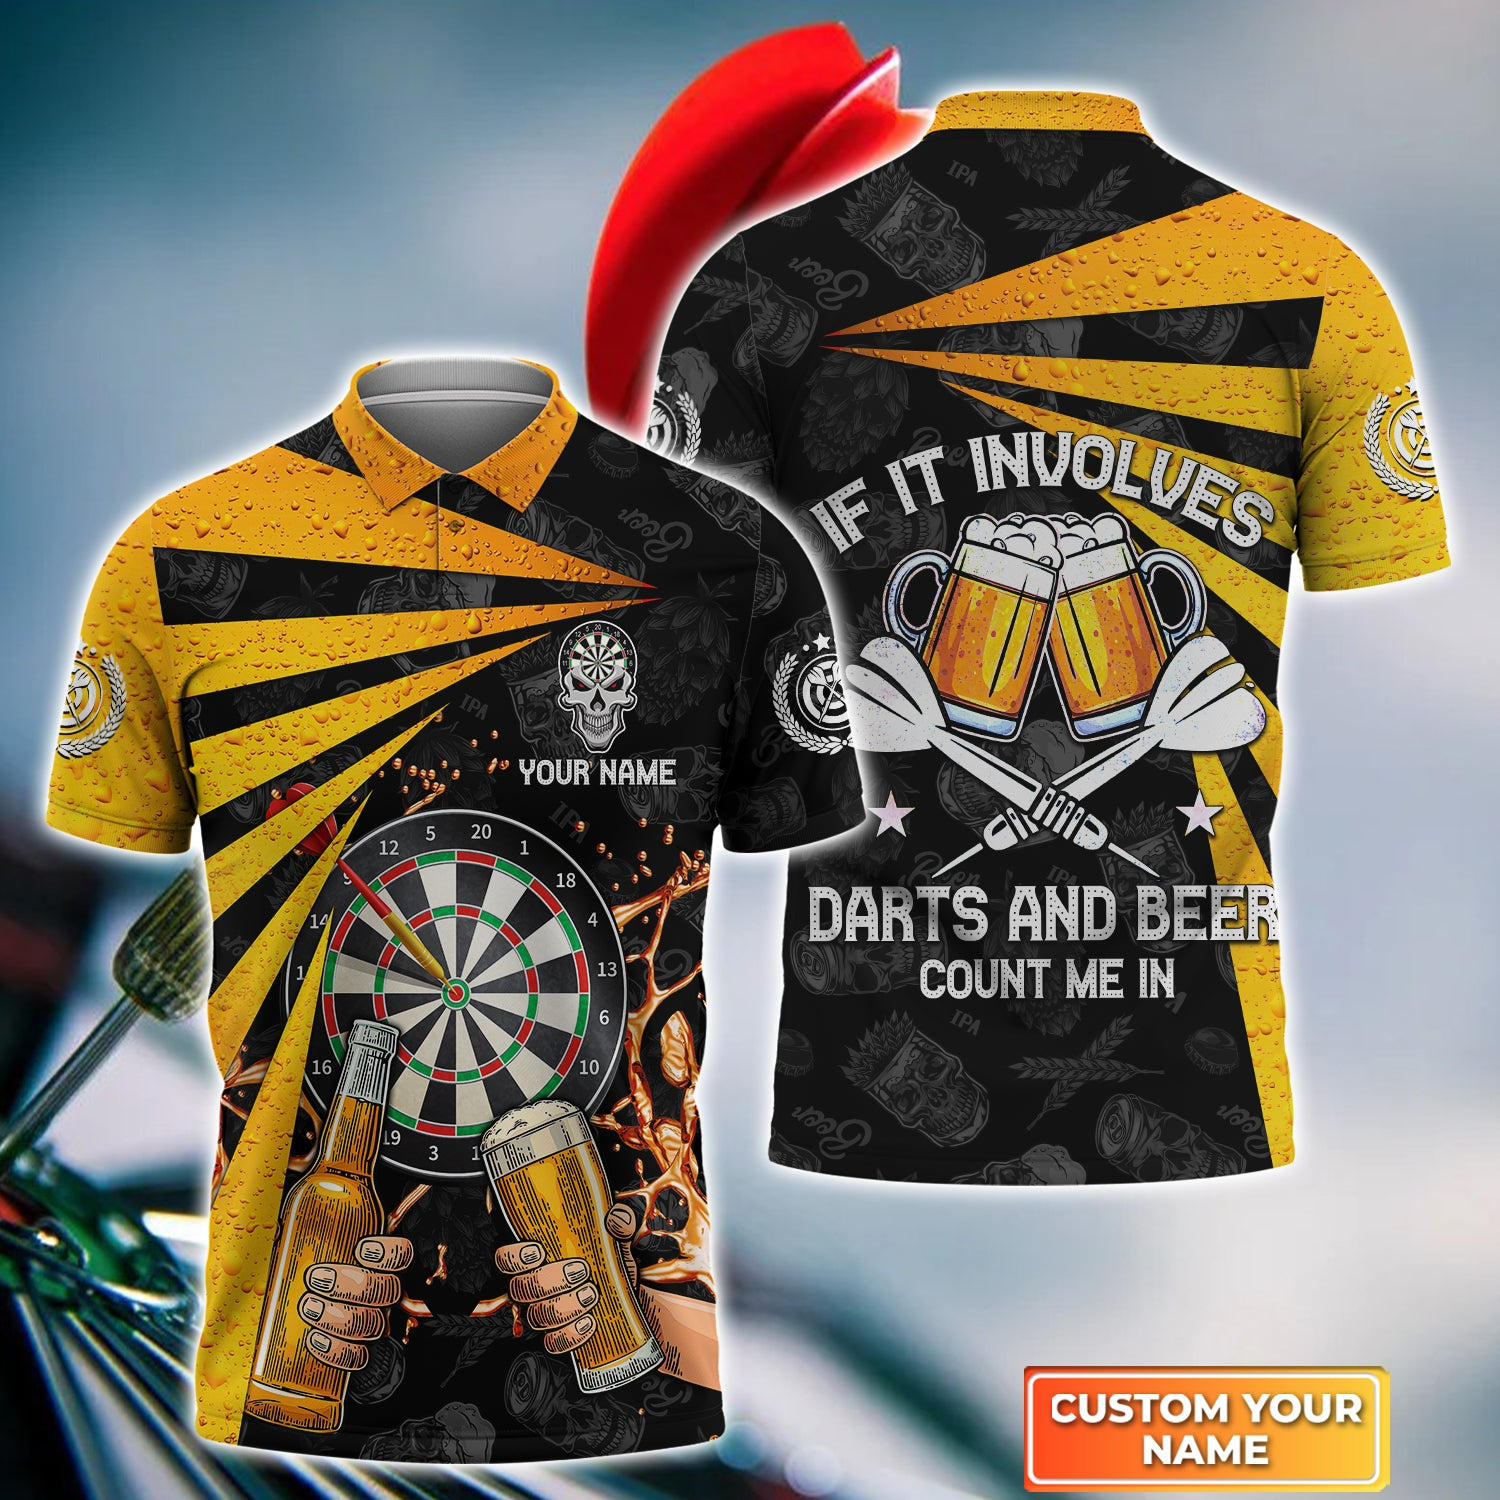 Customized Darts Polo Shirt - Personalized Darts & Beer If It Involves Darts And Beer Count Me In Polo Shirt For Darts Lovers